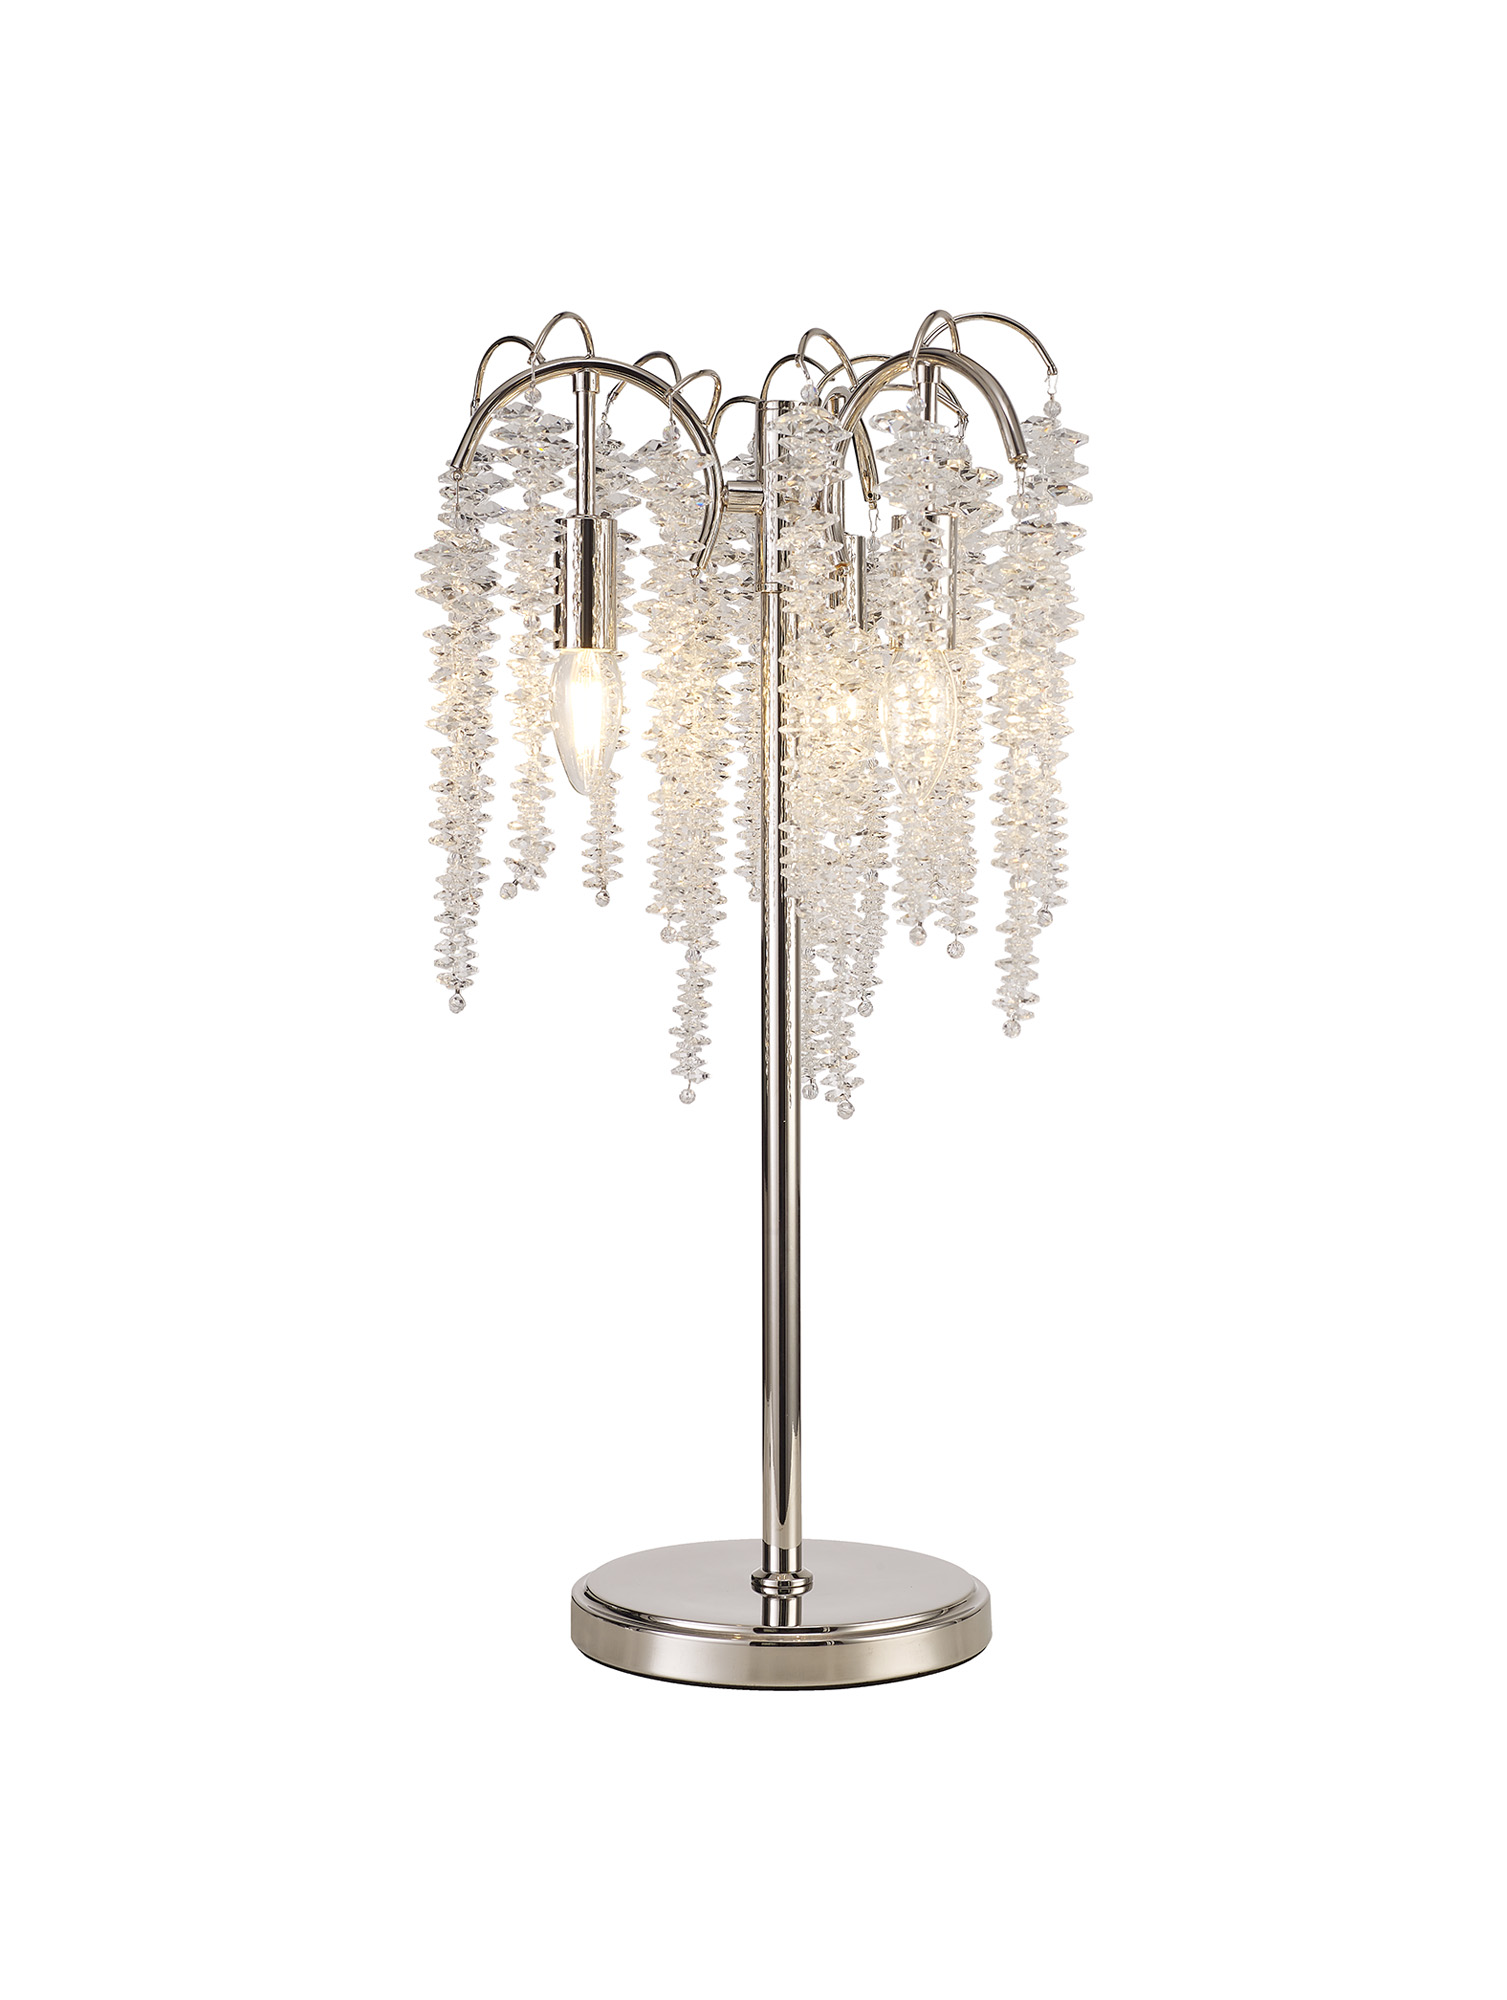 Wisteria Polished Nickel Crystal Table Lamps Diyas Designer Table Lamps